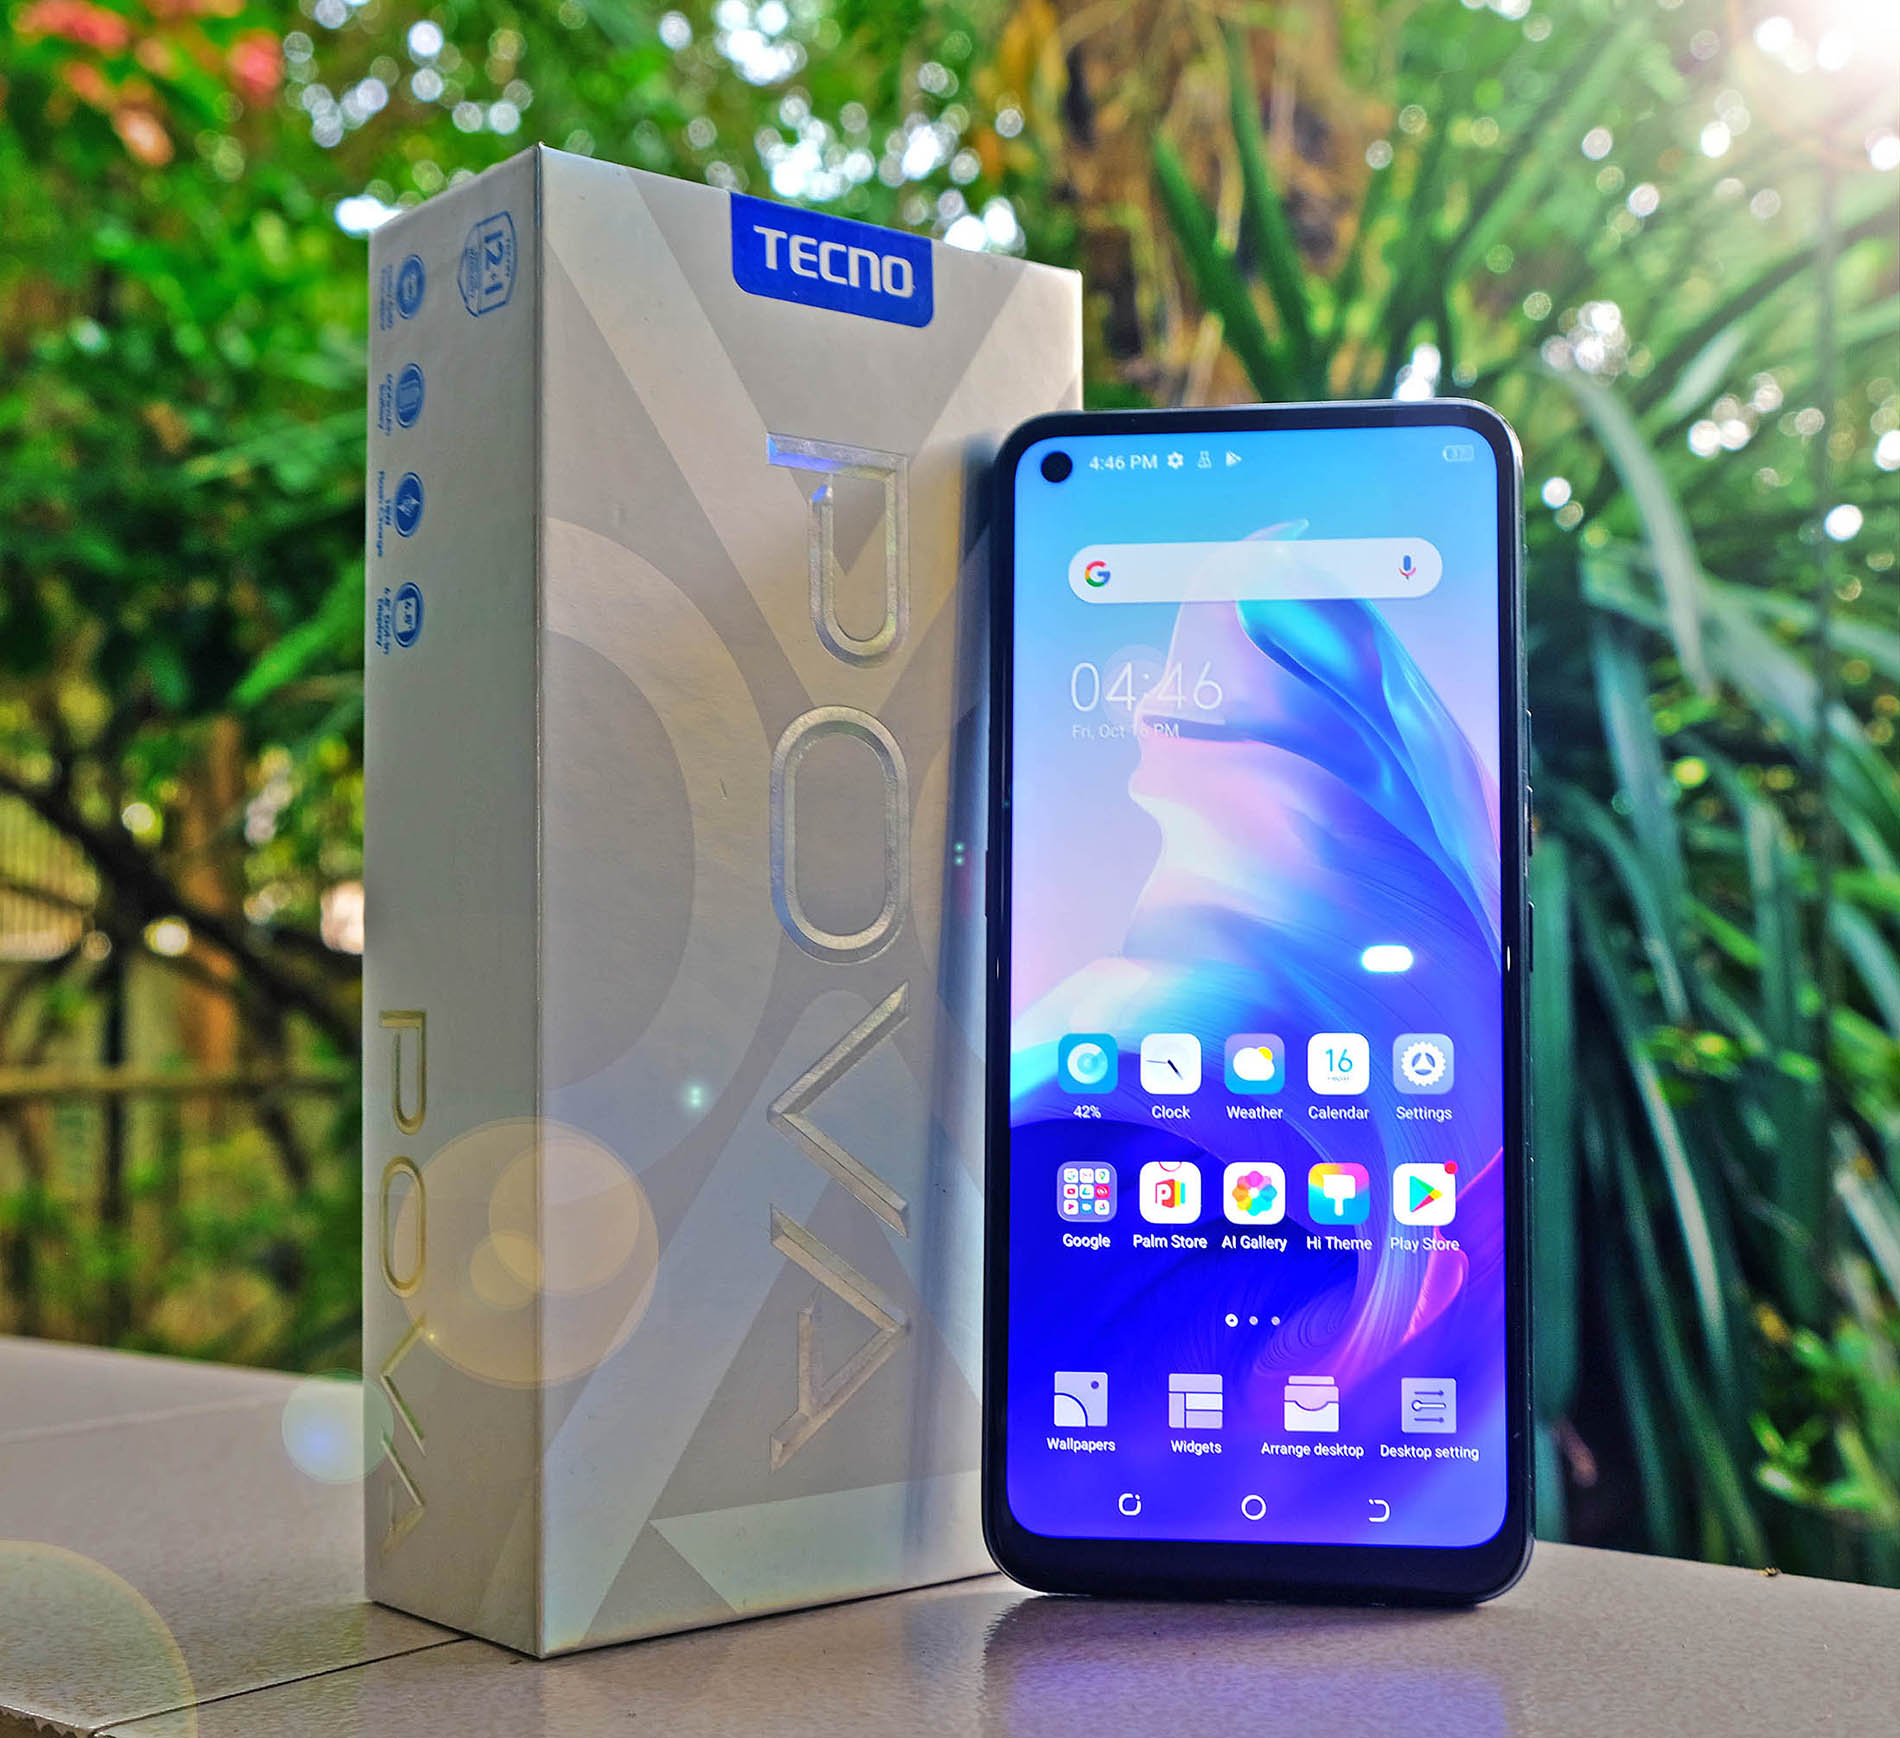 Review: TECNO Mobile POVA – Features, Price and Full Specifications